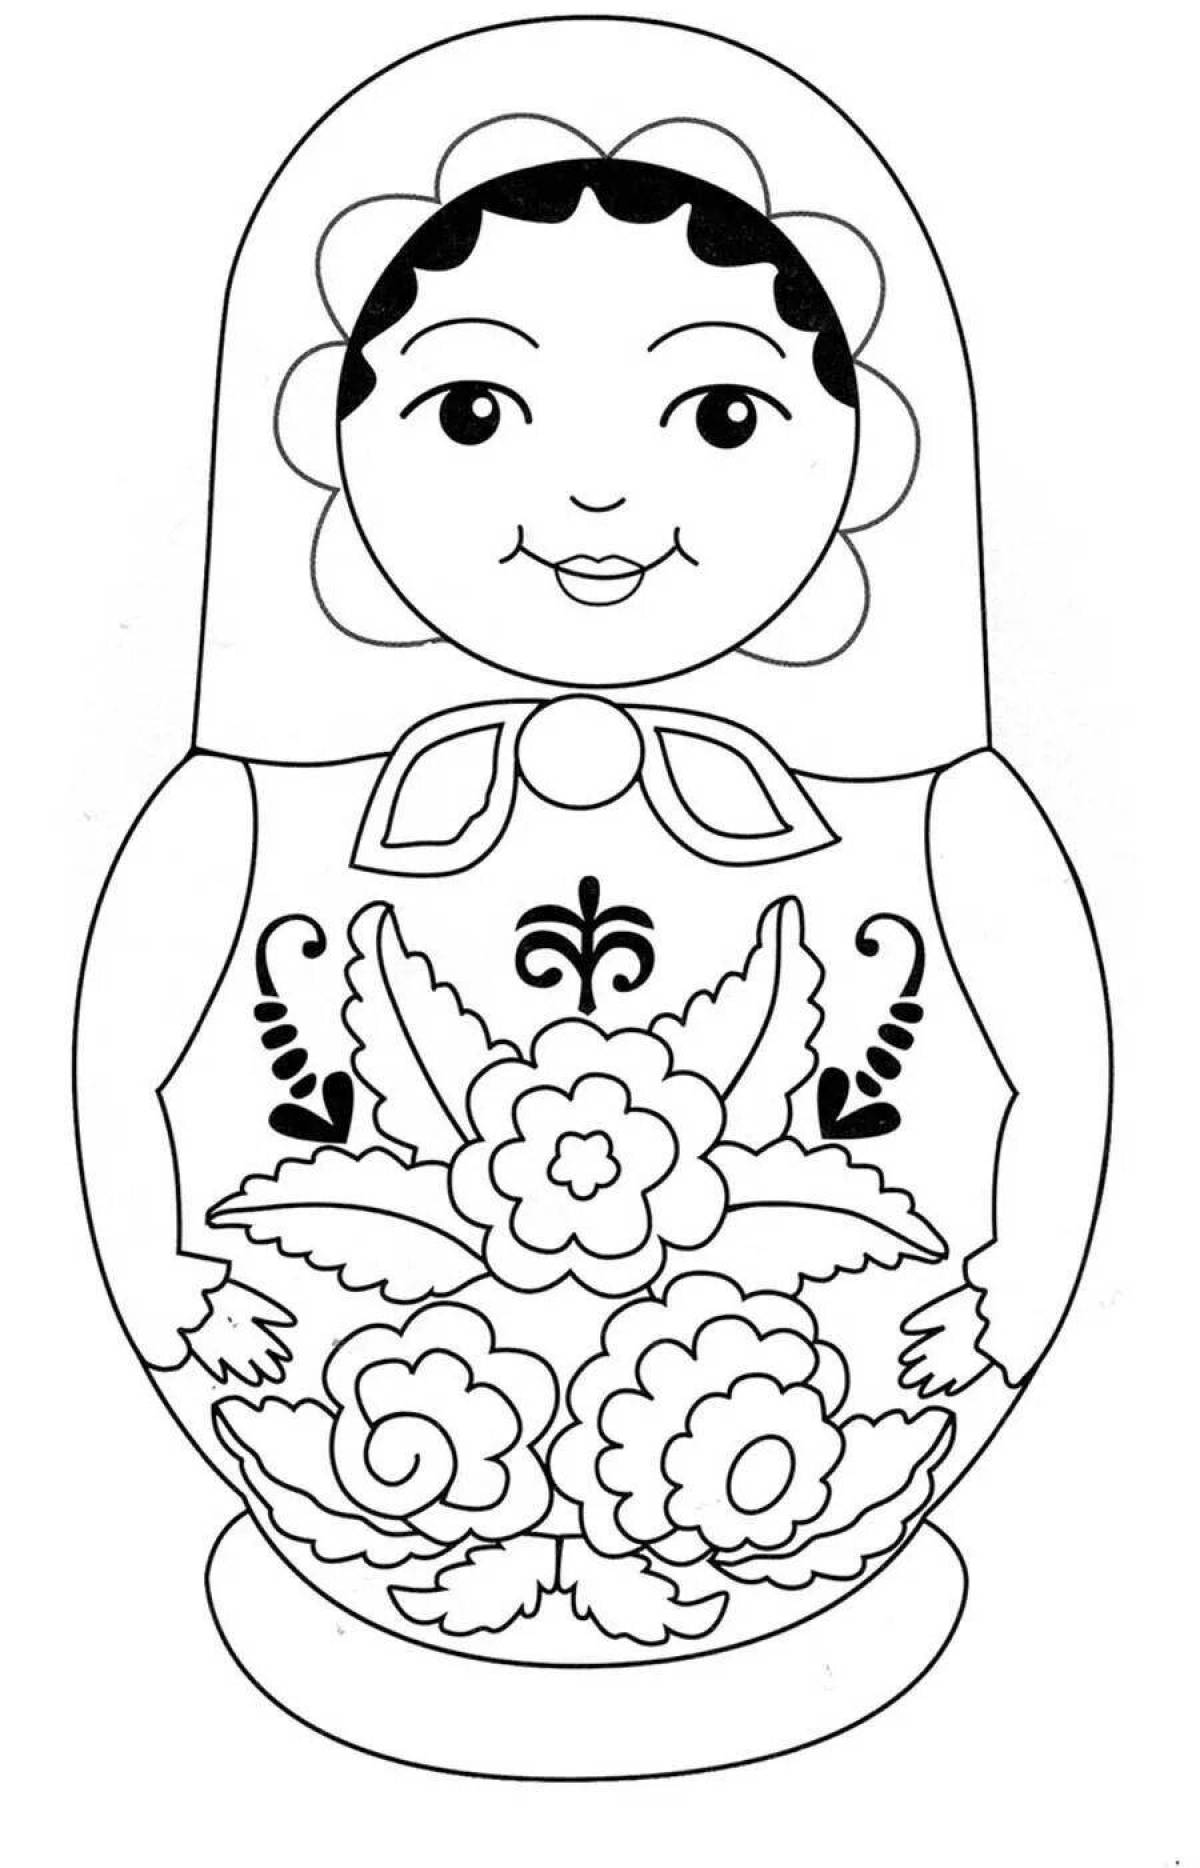 Adorable matryoshka coloring book for 3-4 year olds